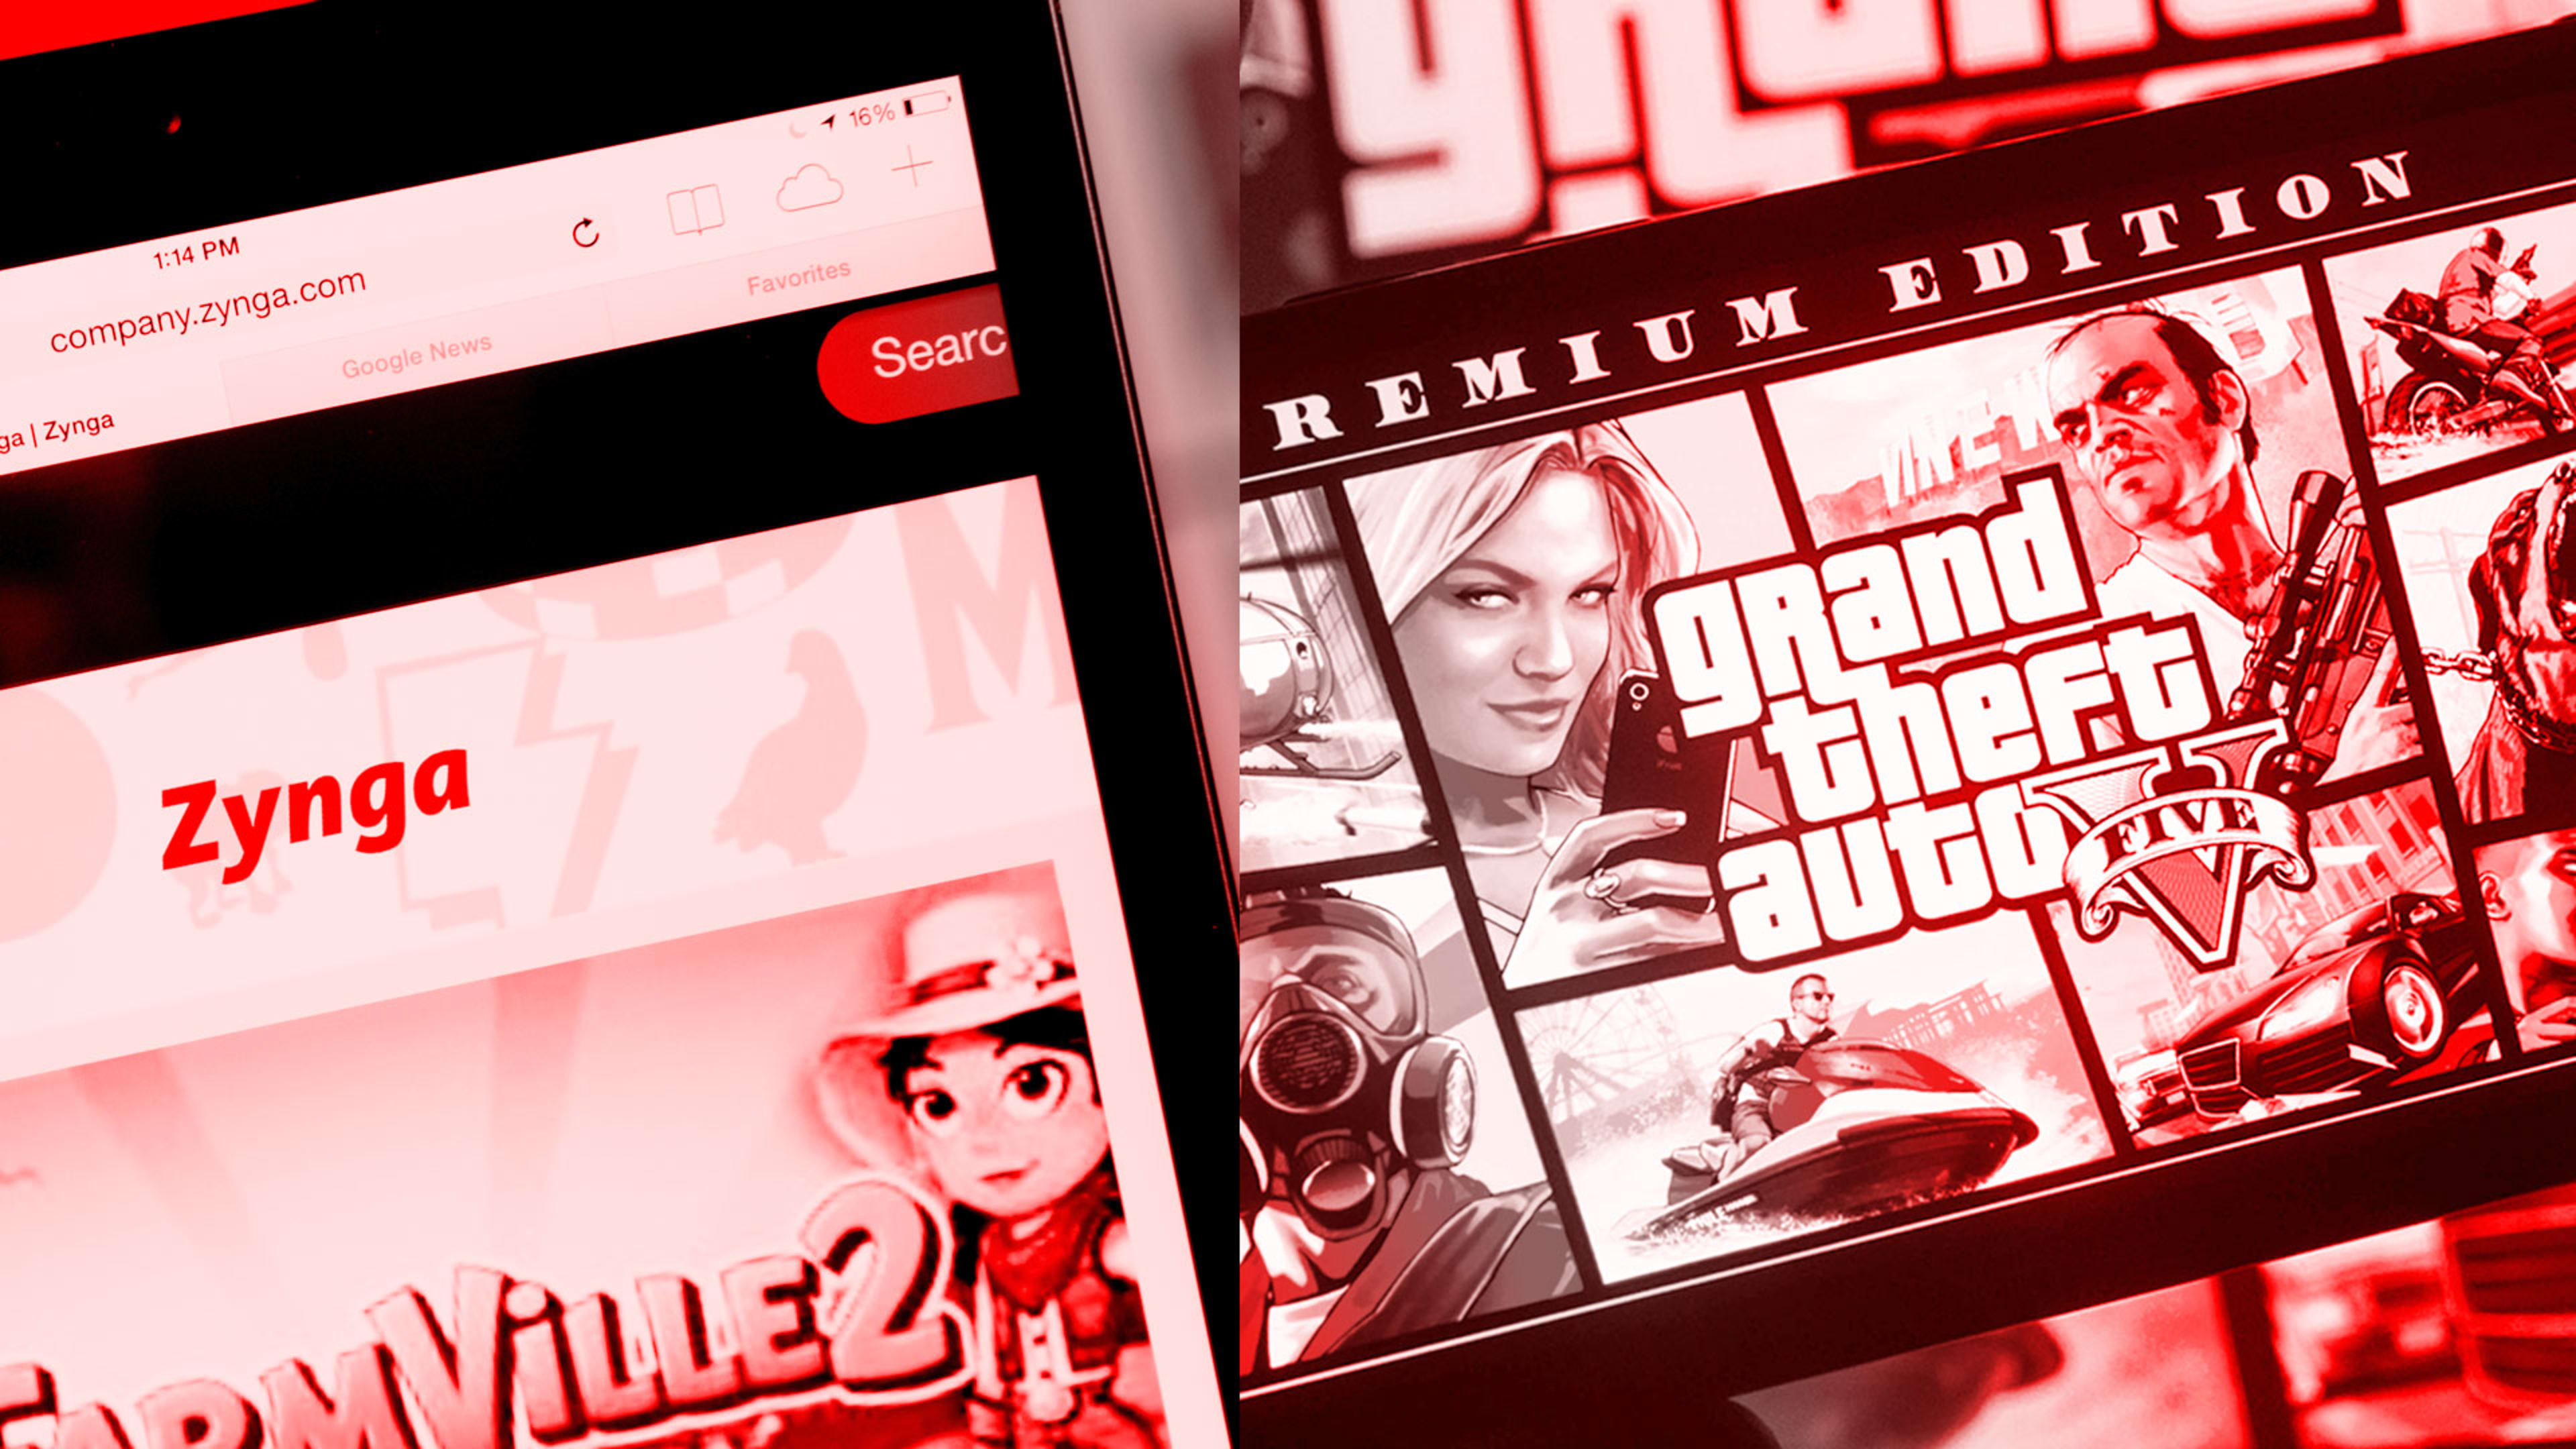 Grand Theft Auto maker Take-Two Interactive is buying FarmVille’s Zynga for $12.7 billion